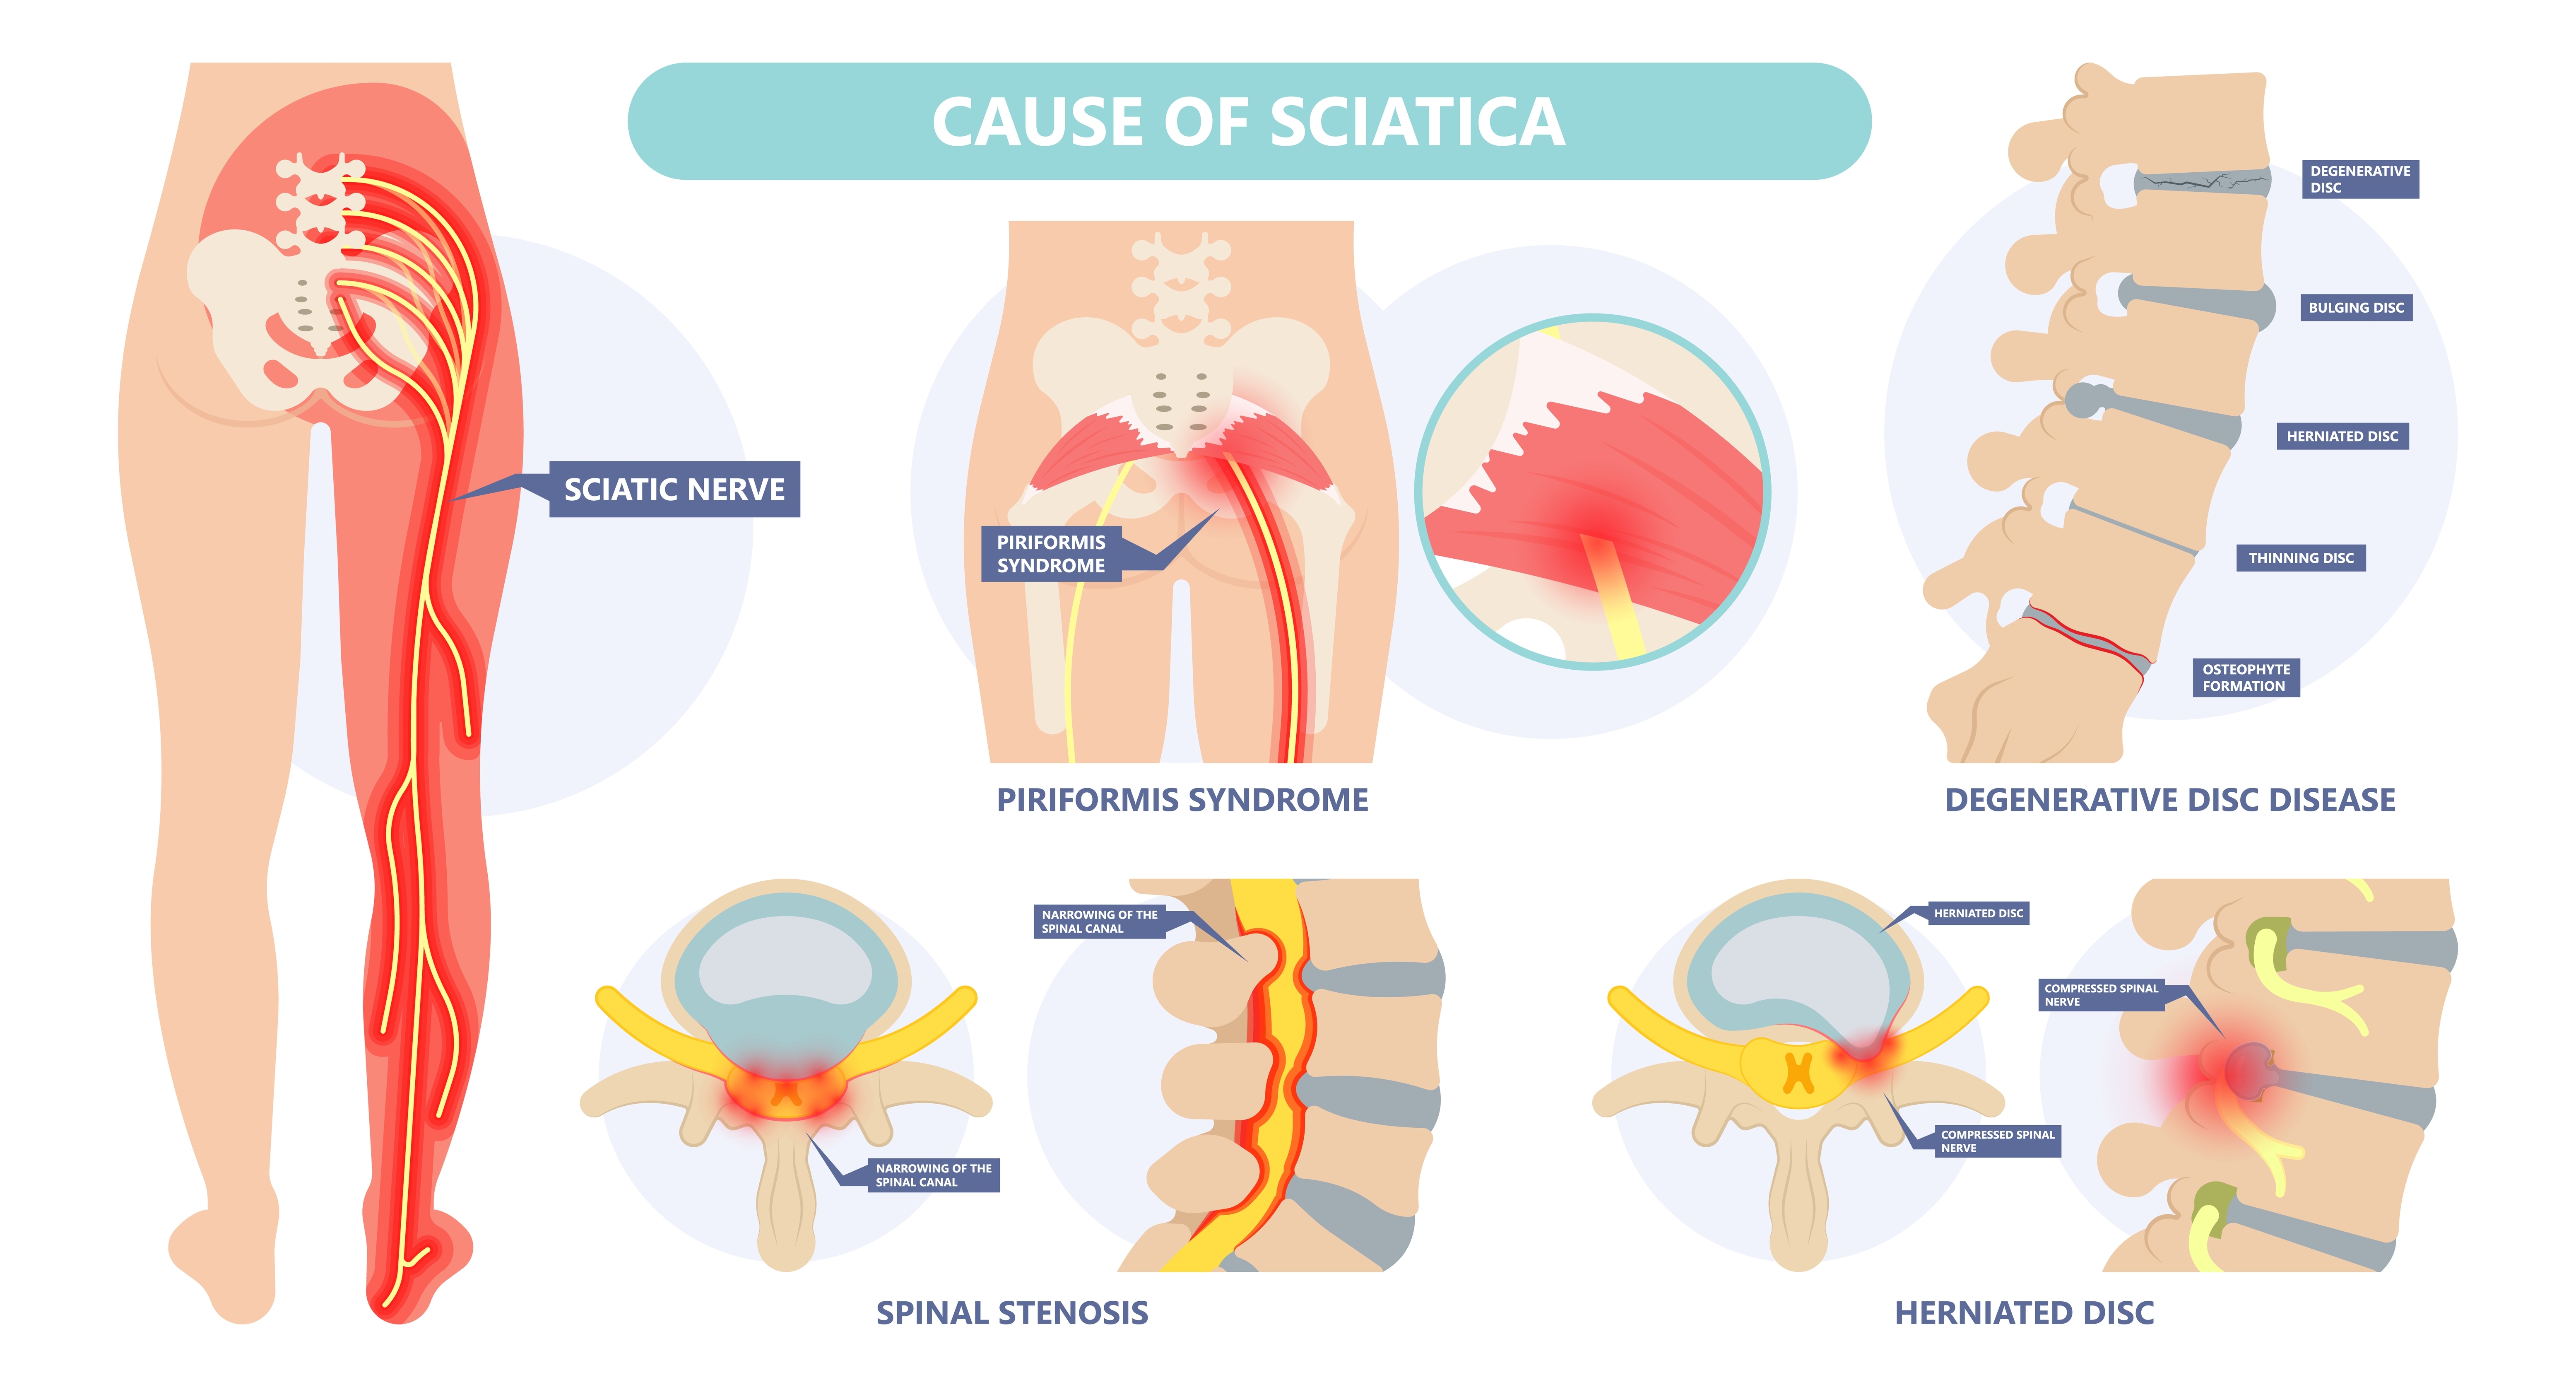 Sciatica: Causes, conservative care, surgery, and injection